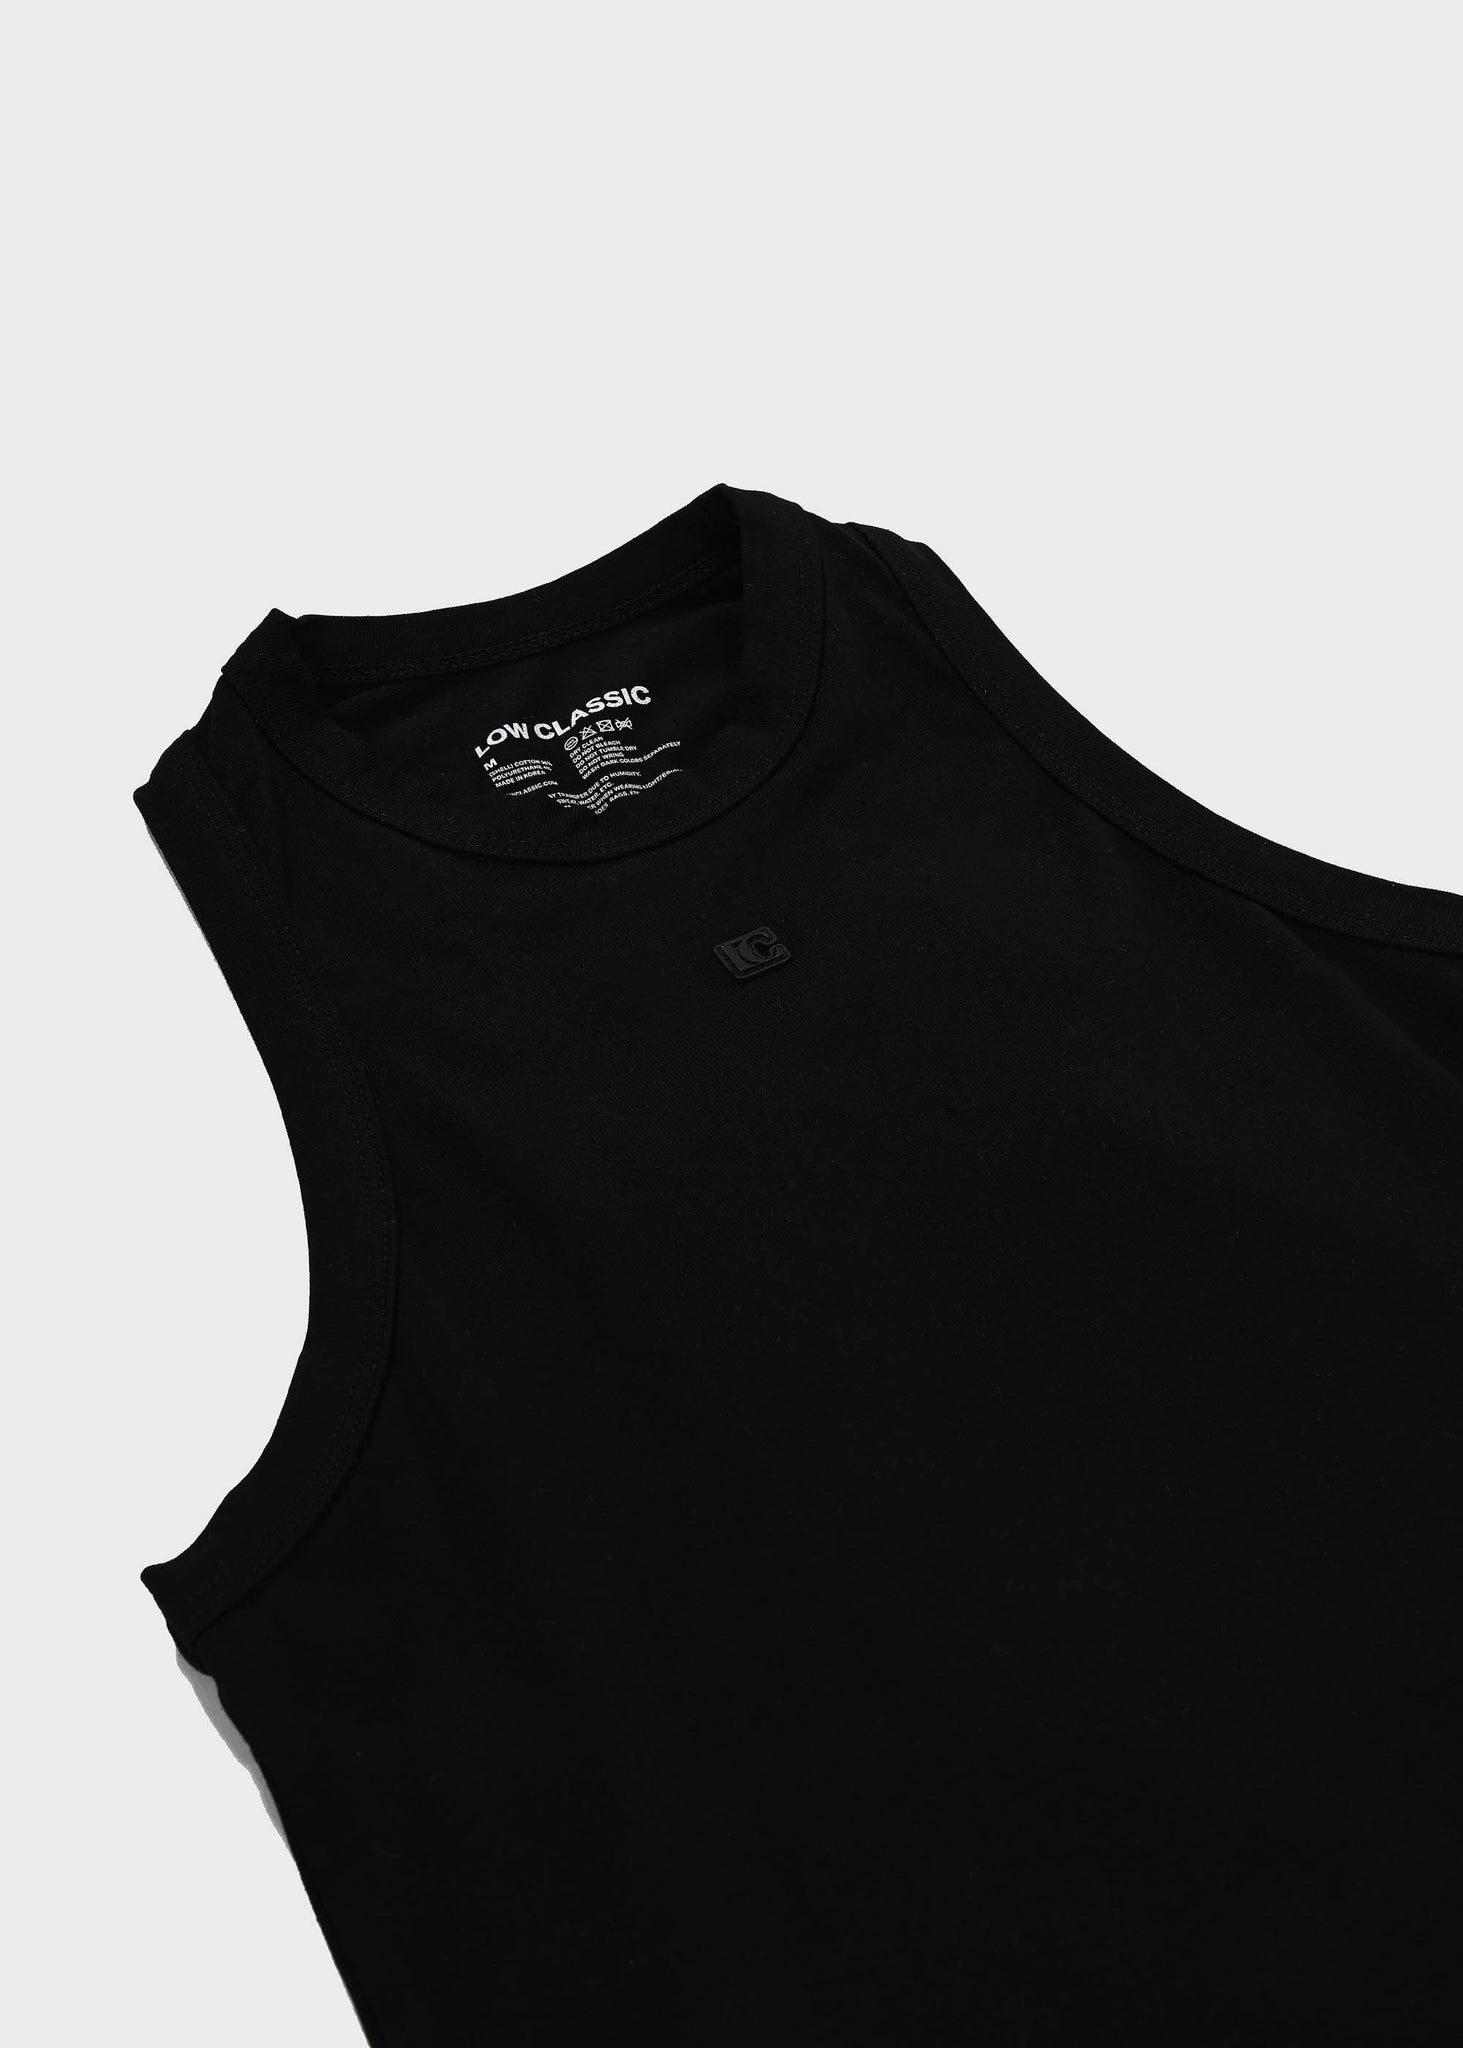 Black Jersey Tank Top - 157Moments